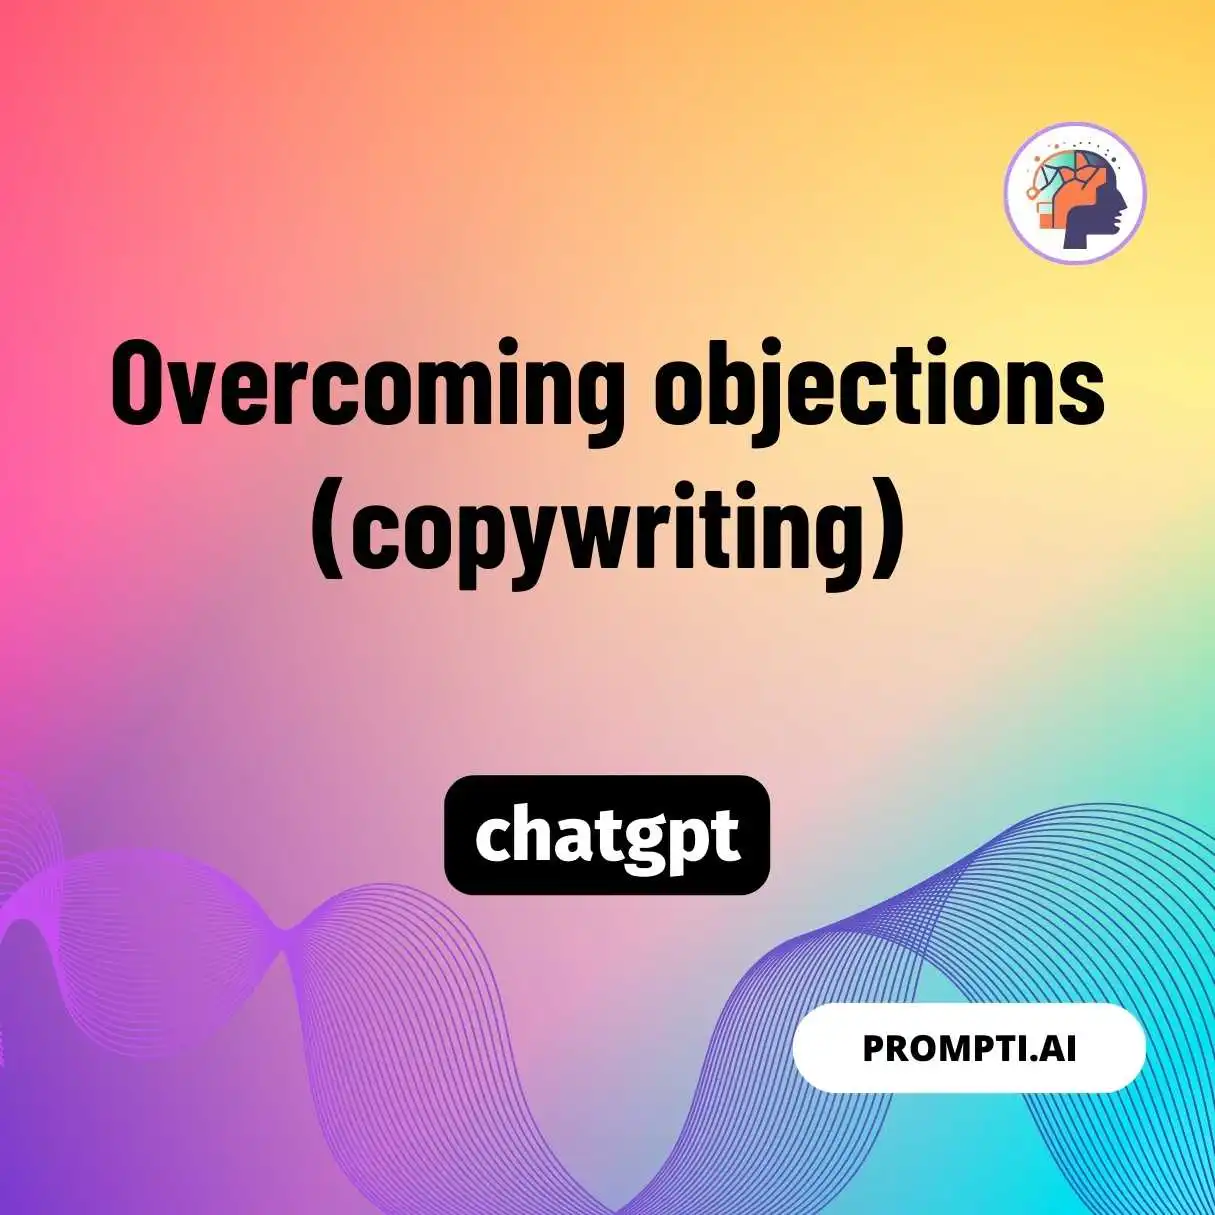 Overcoming objections (copywriting)